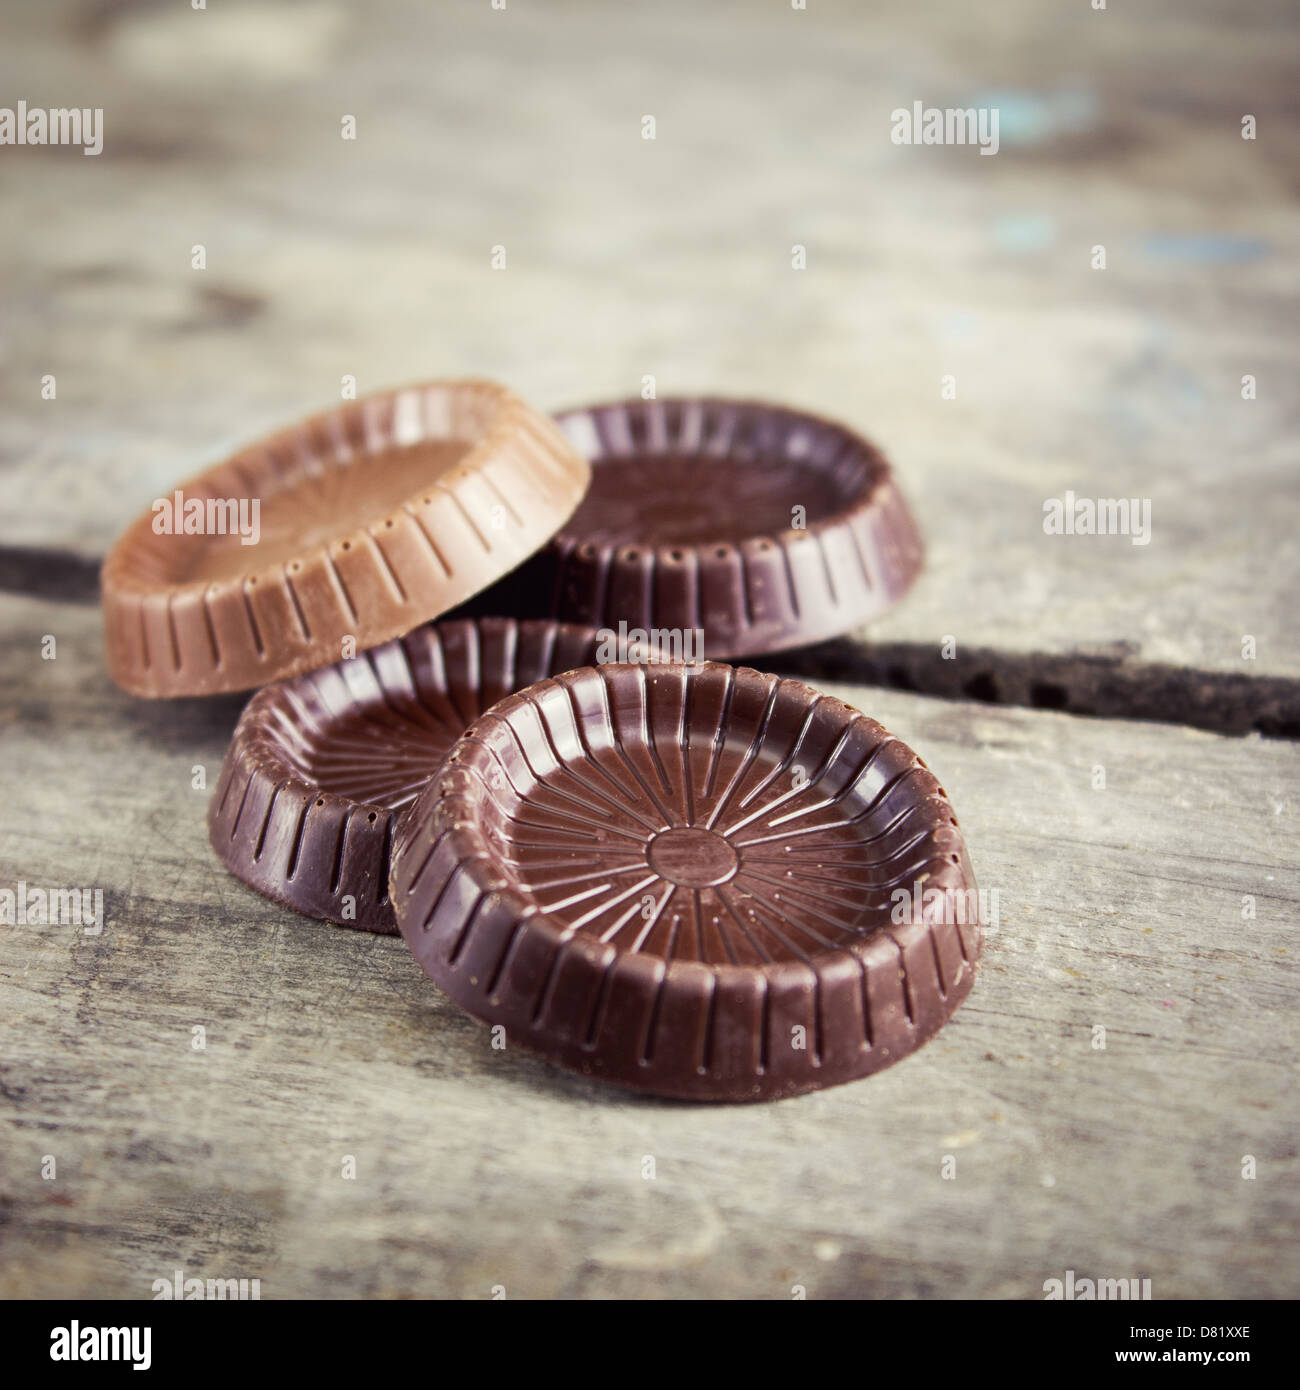 chocolate bar on a wooden table, close up photo Stock Photo